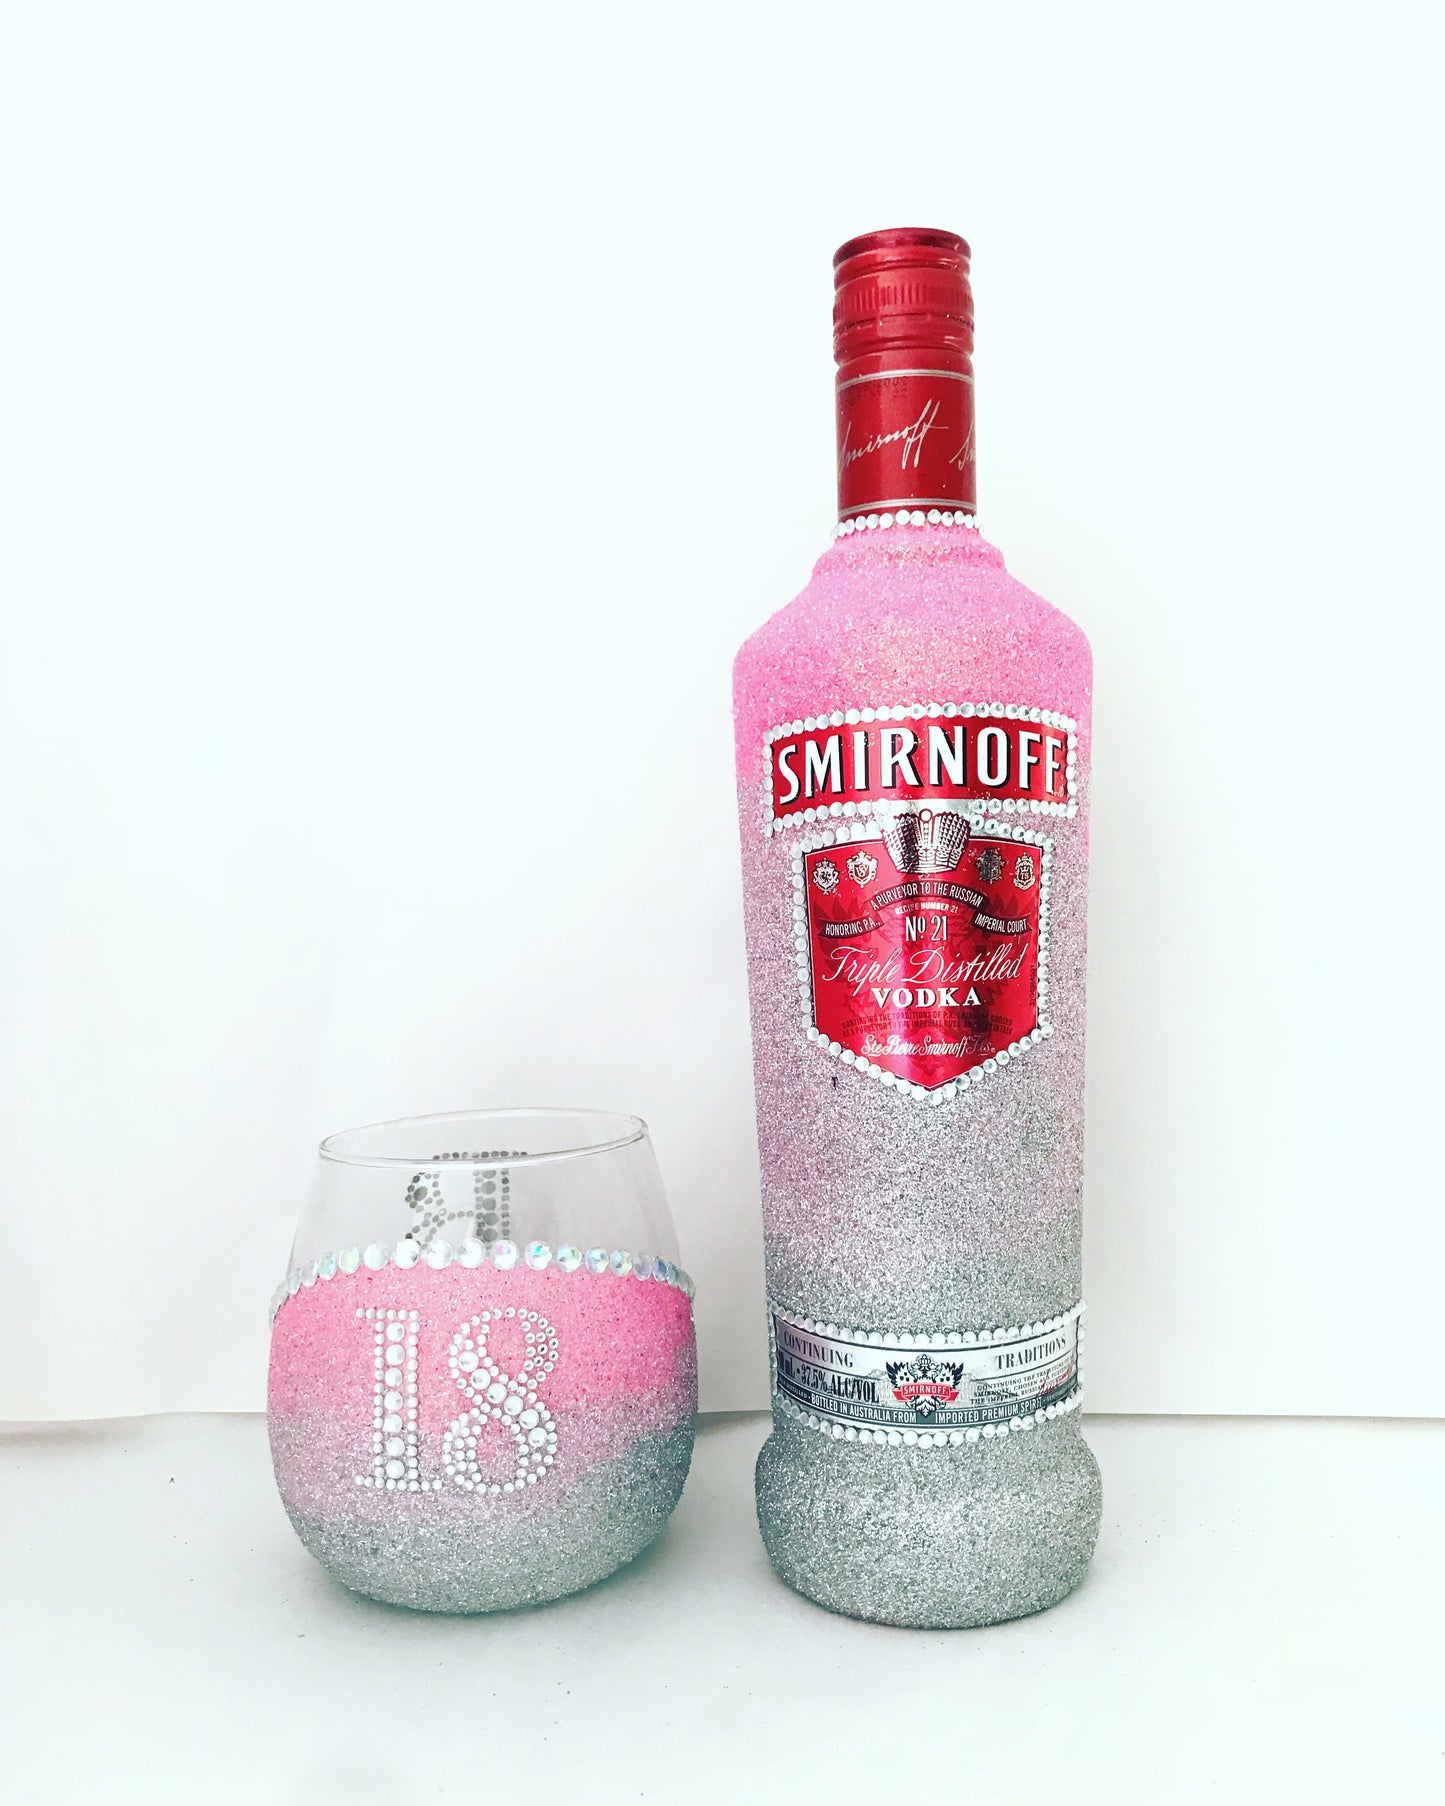 Smirnoff with Stemless glass includes a bling initial or number